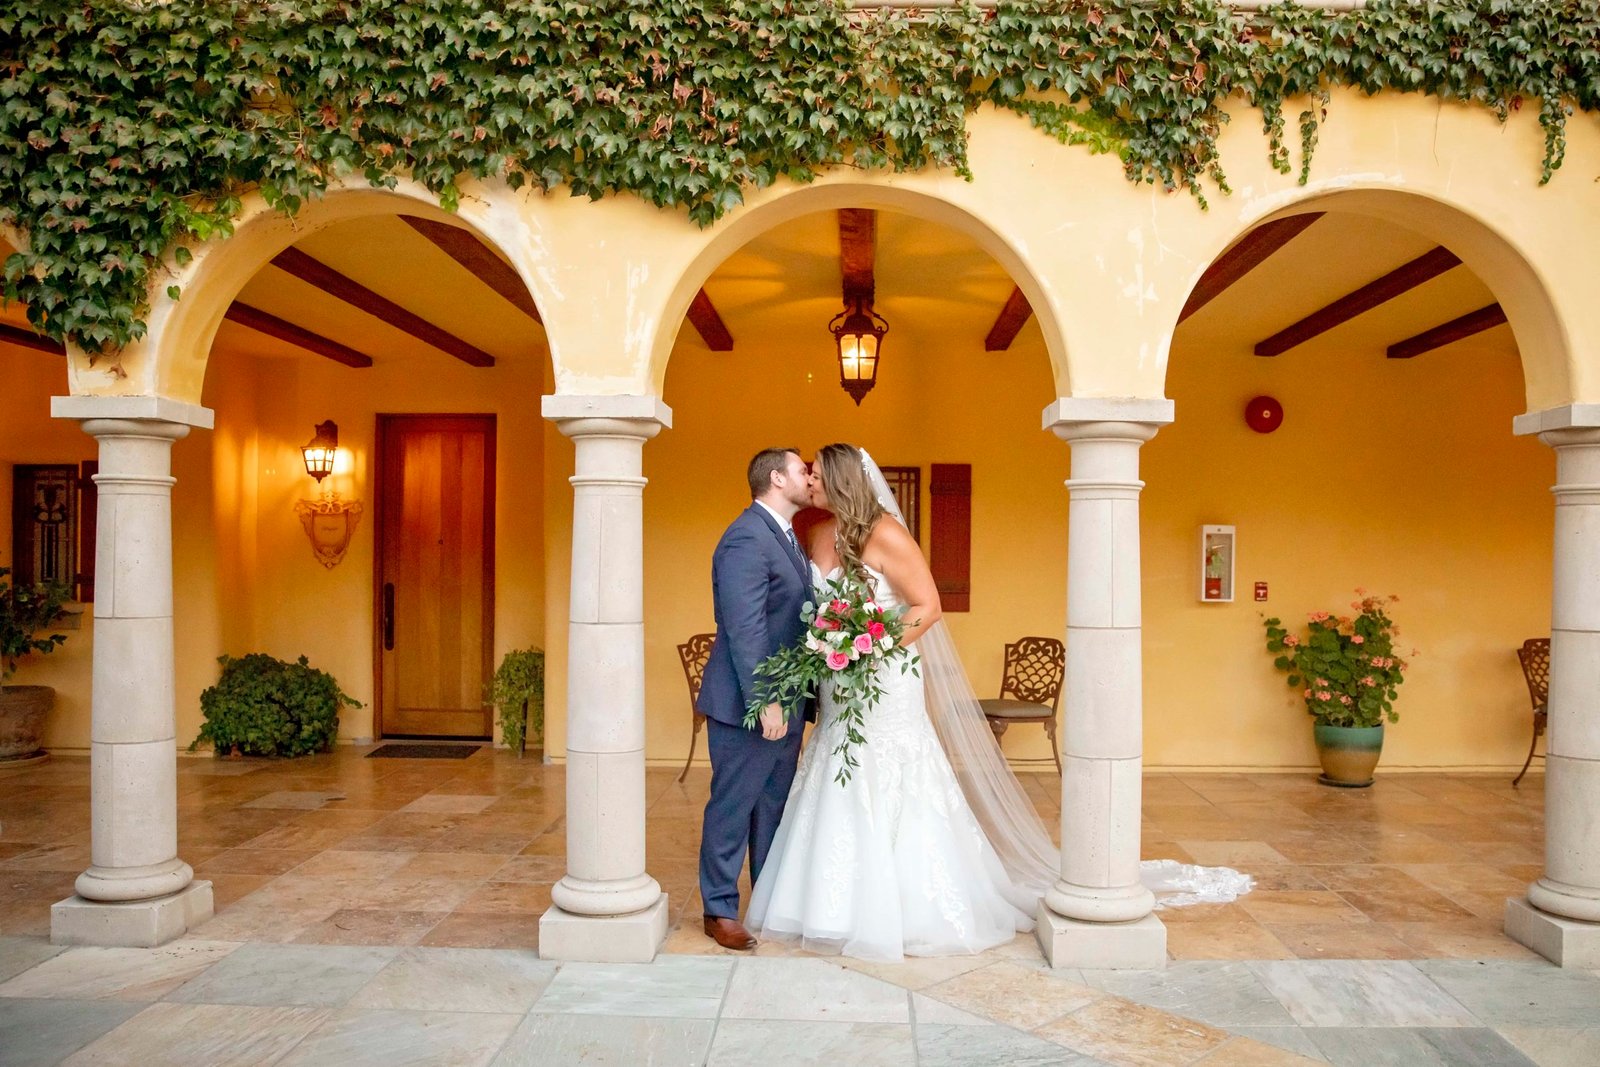 Bride and groom kissing under an archway